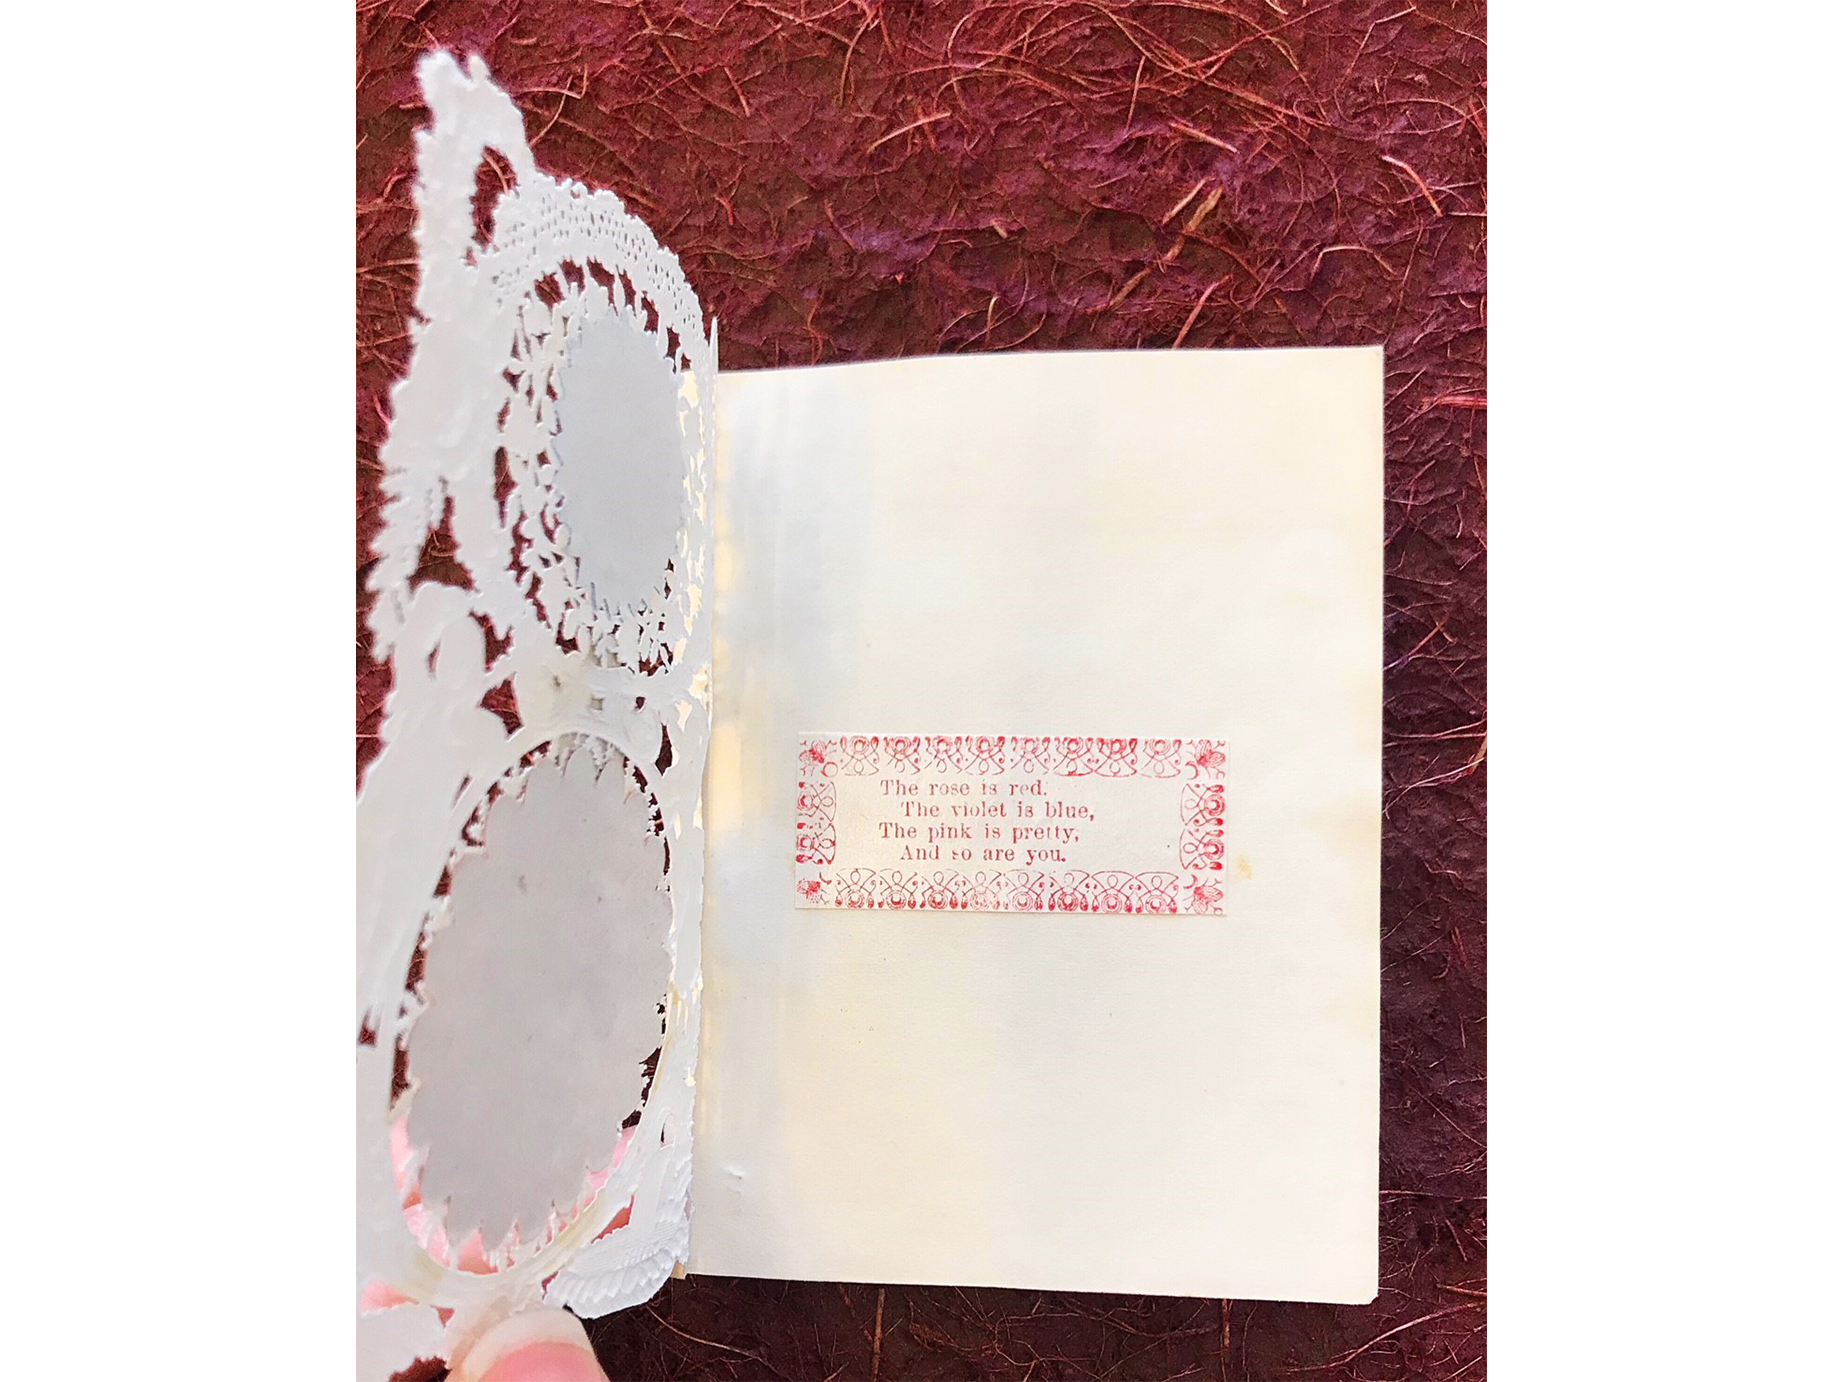 paper lace valentines with a poem